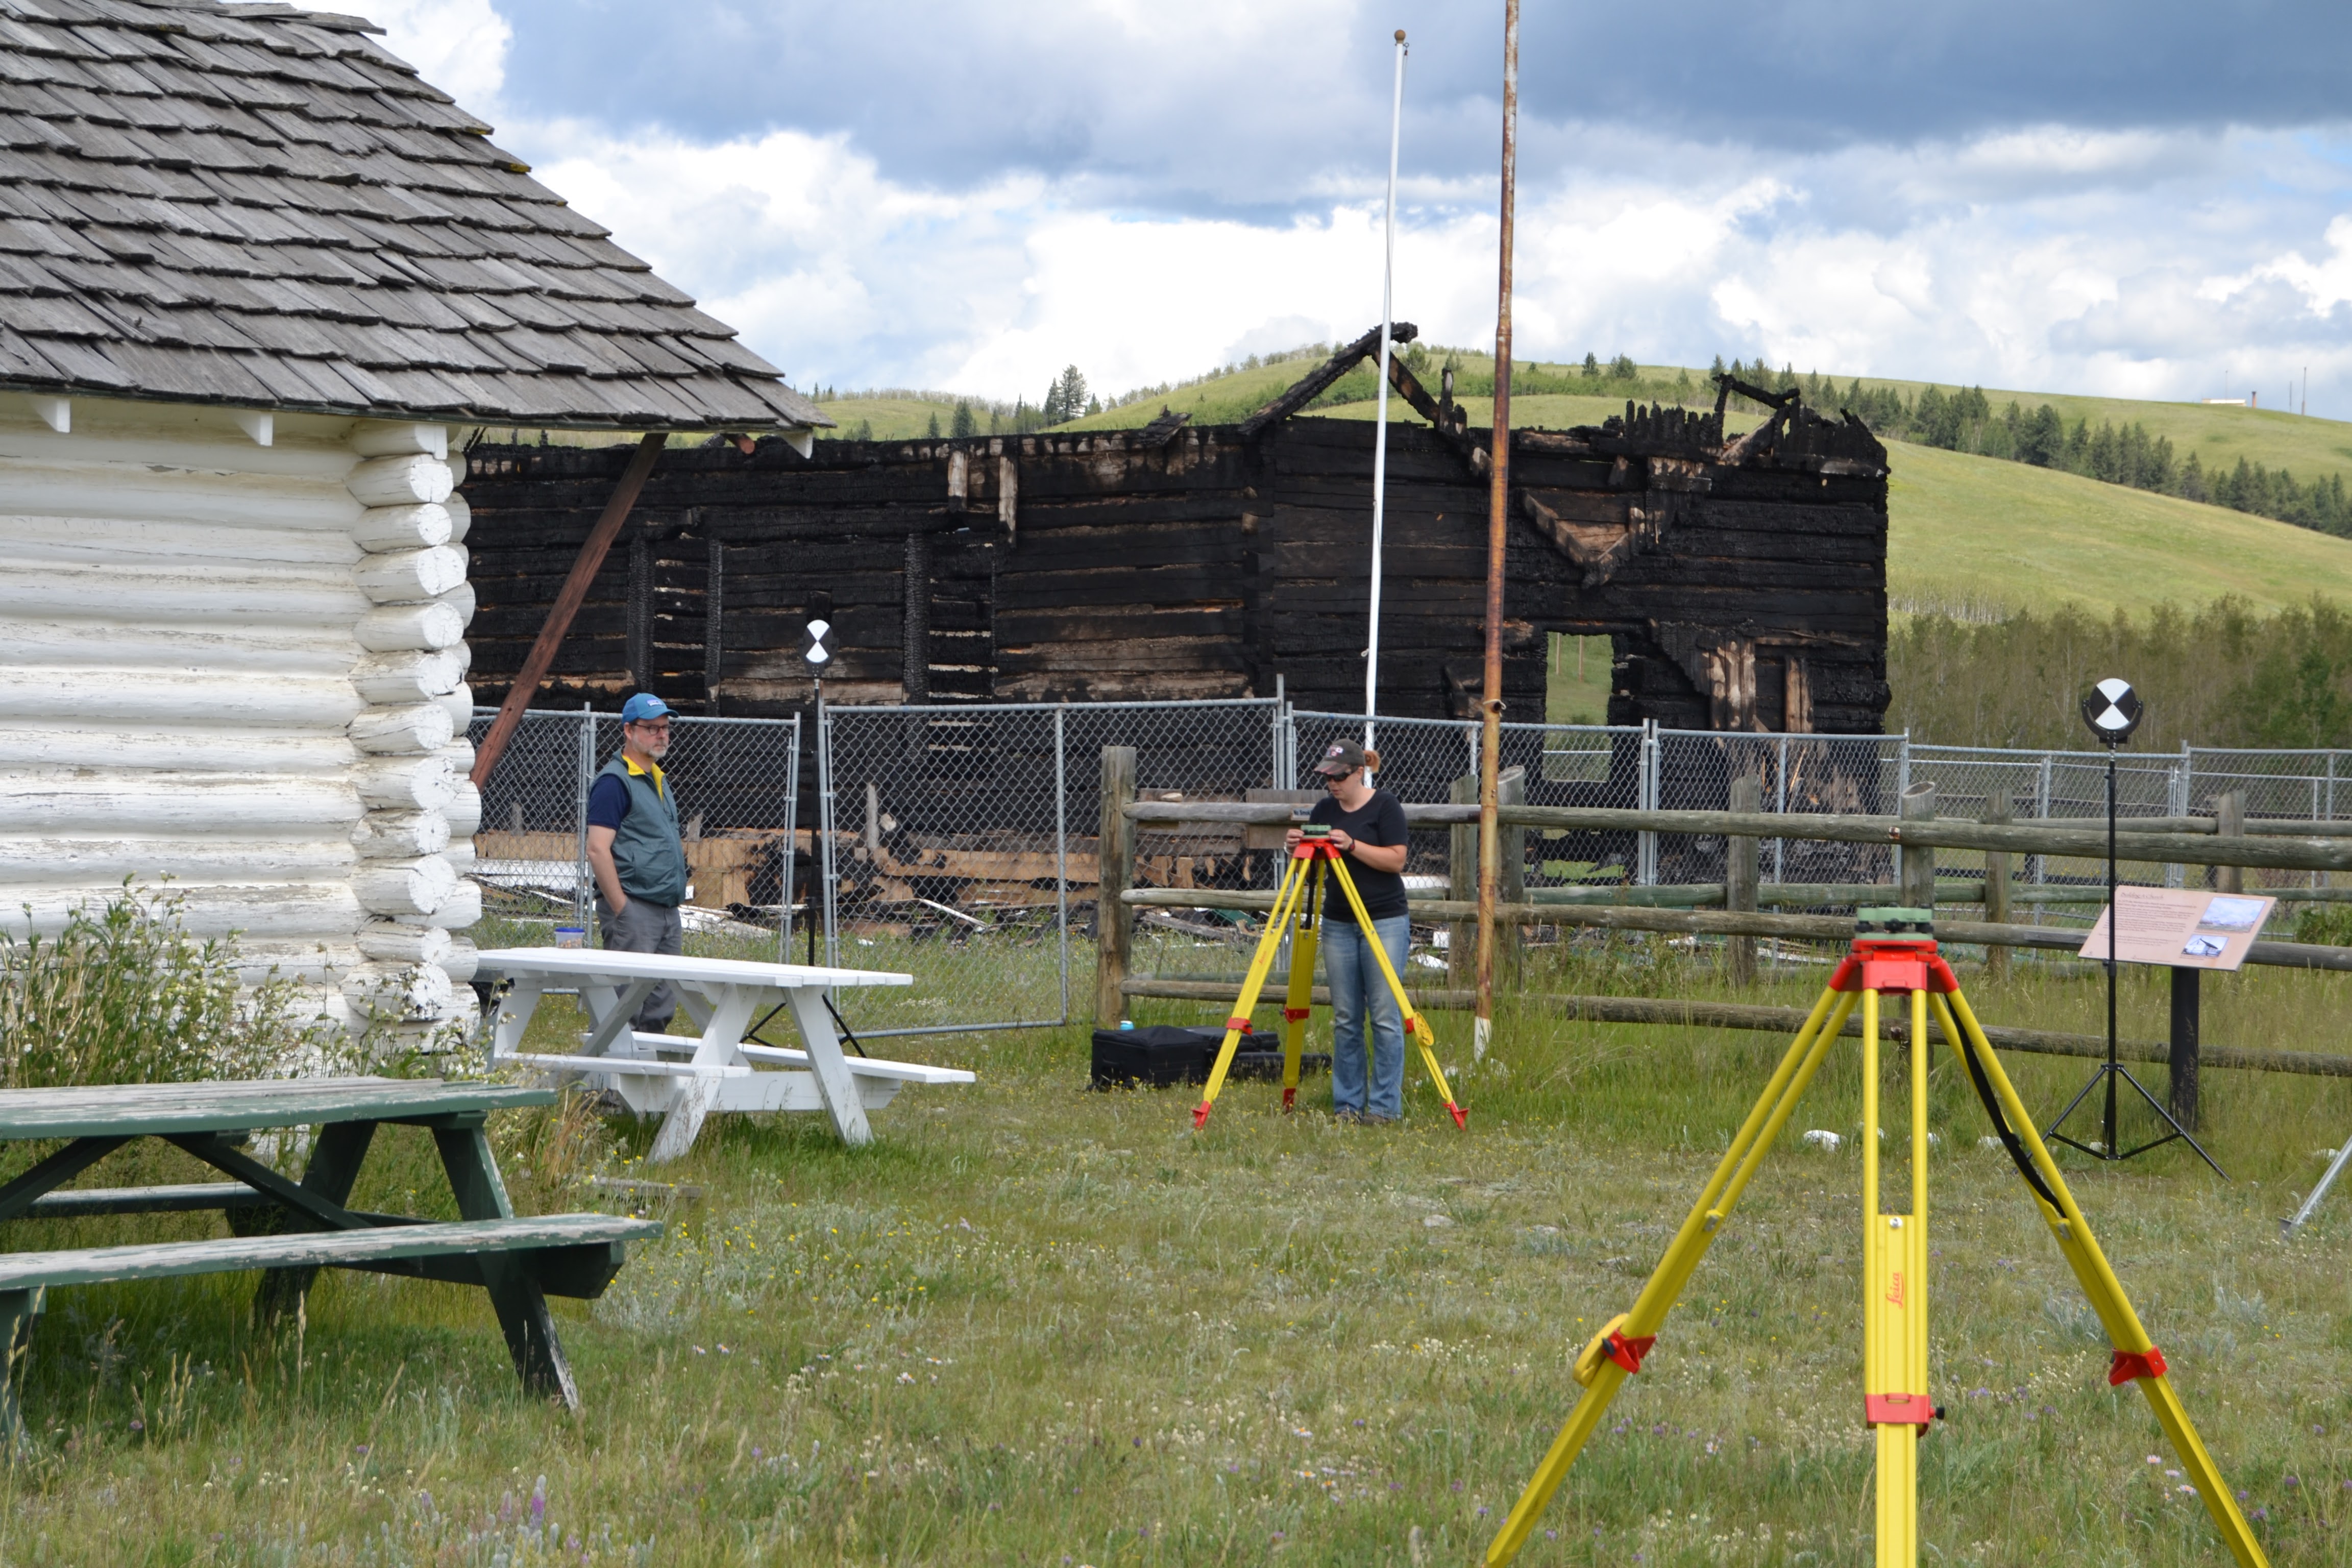 Dr. Peter Dawson and Christina Robinson setting up for terrestrial laser scanning at Walking Buffalo's cabin with the burnt remains of McDougall United Memorial Church in the background, June 24th, 2017.